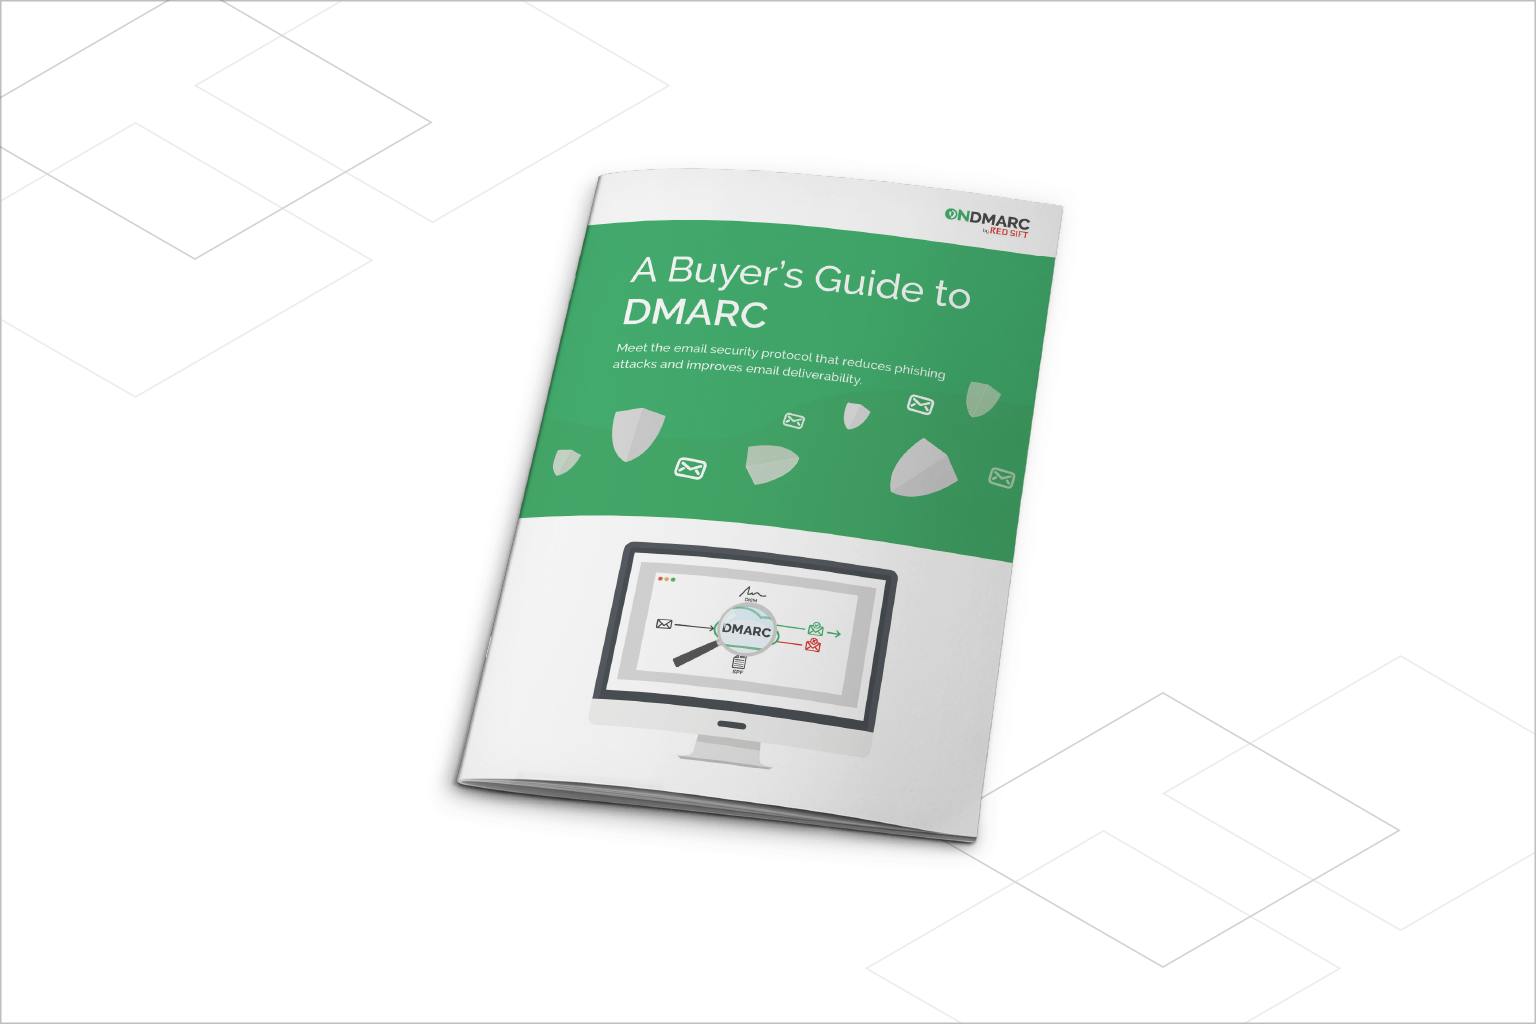 The DMARC buyer's guide